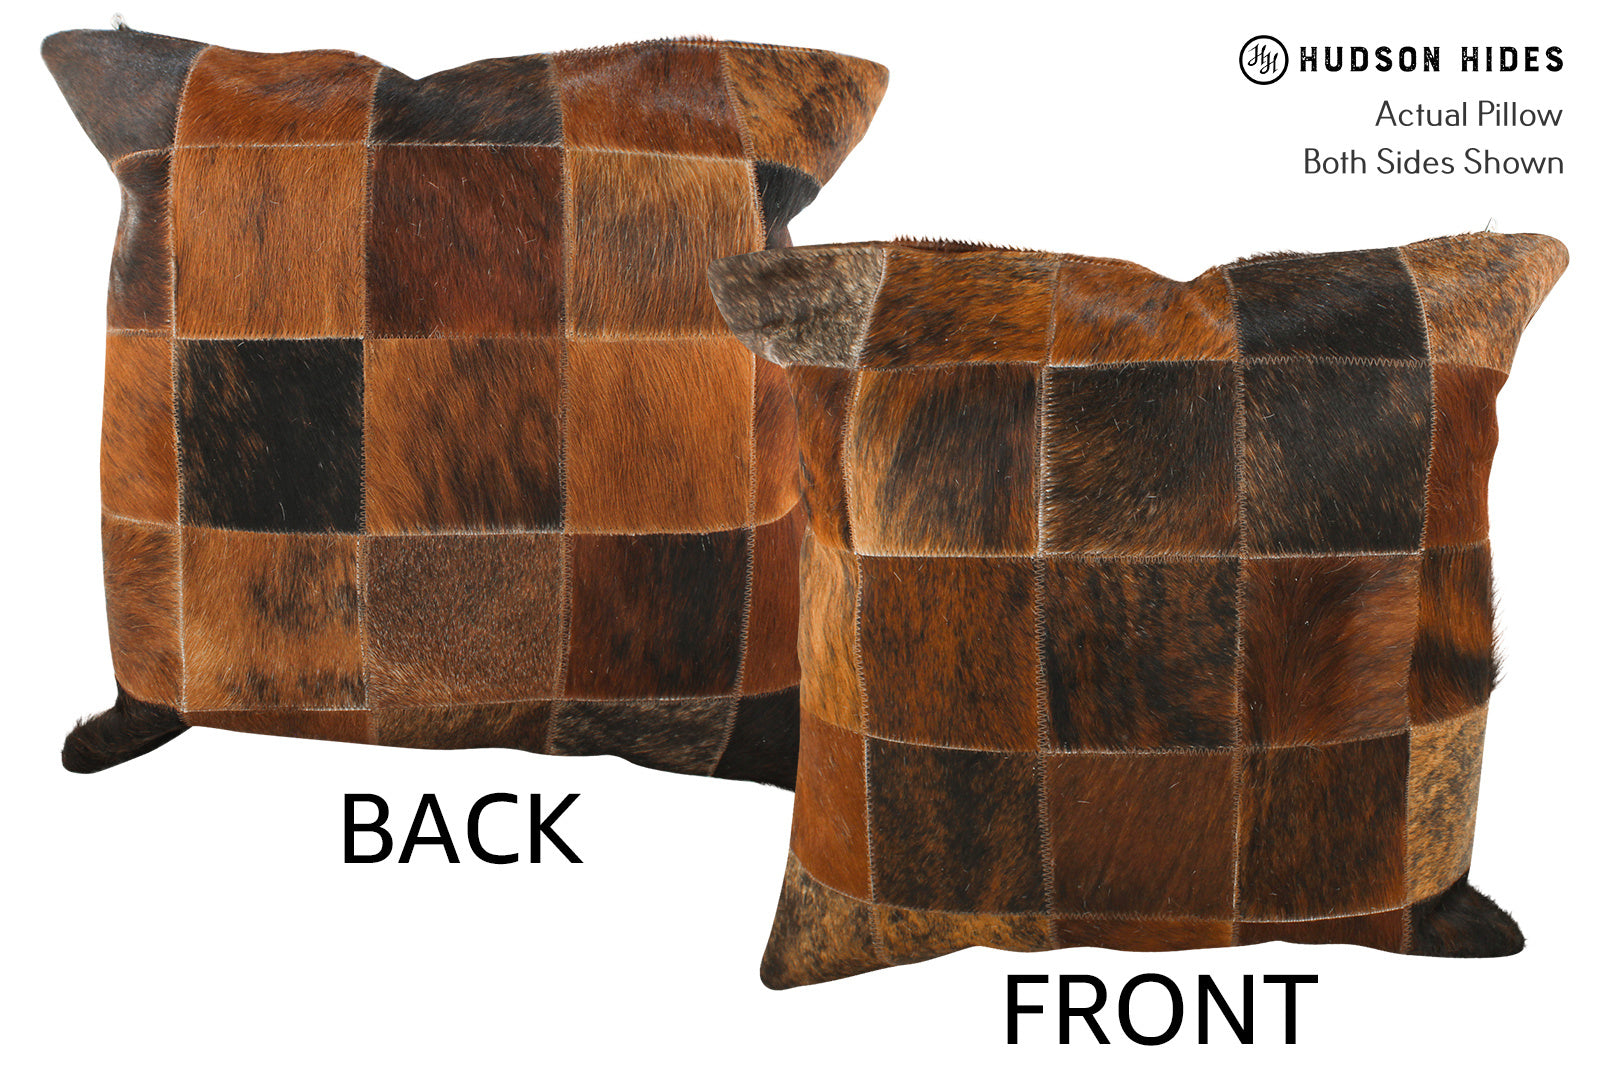 Patchwork Cowhide Pillow #33846